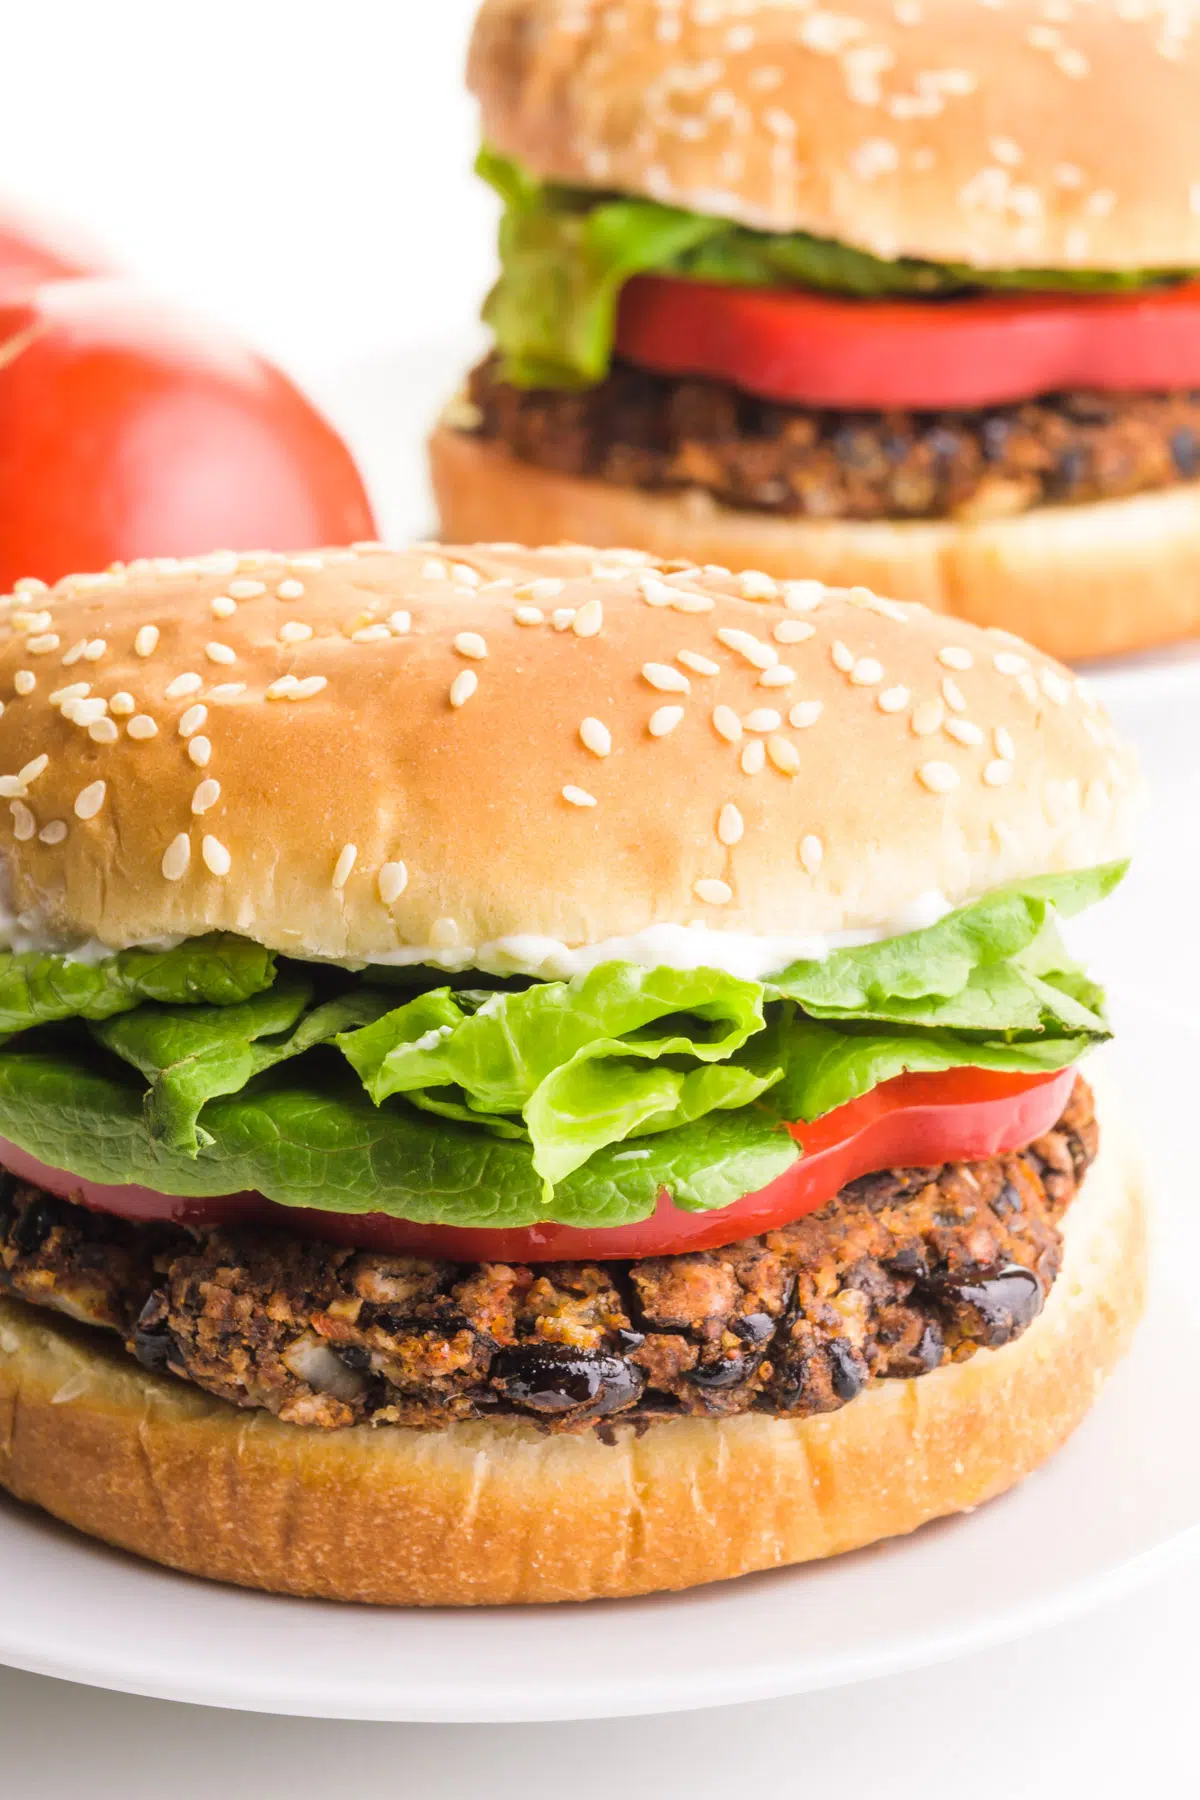 A vegan black bean burger sits on a bun with toppings like lettuce. There's another burger in the background and a tomato.